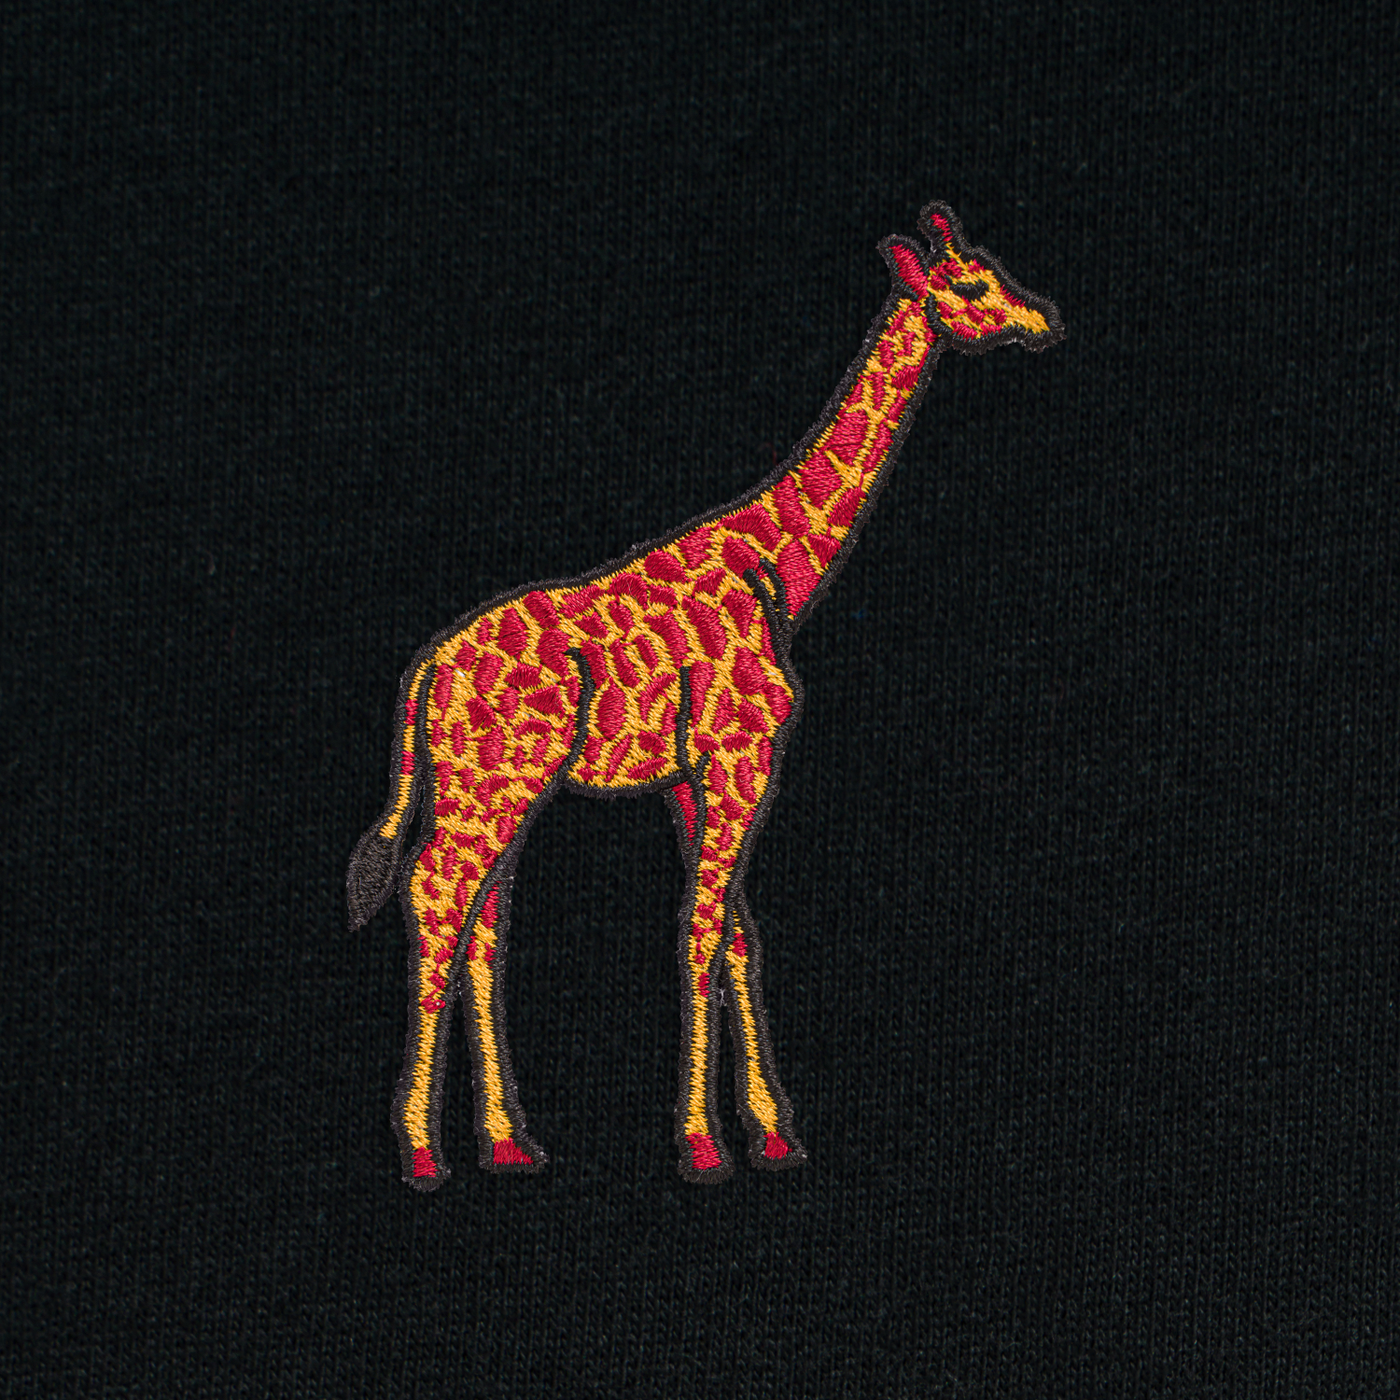 Bobby's Planet Men's Embroidered Giraffe Long Sleeve Shirt from African Animals Collection in Black Color#color_black